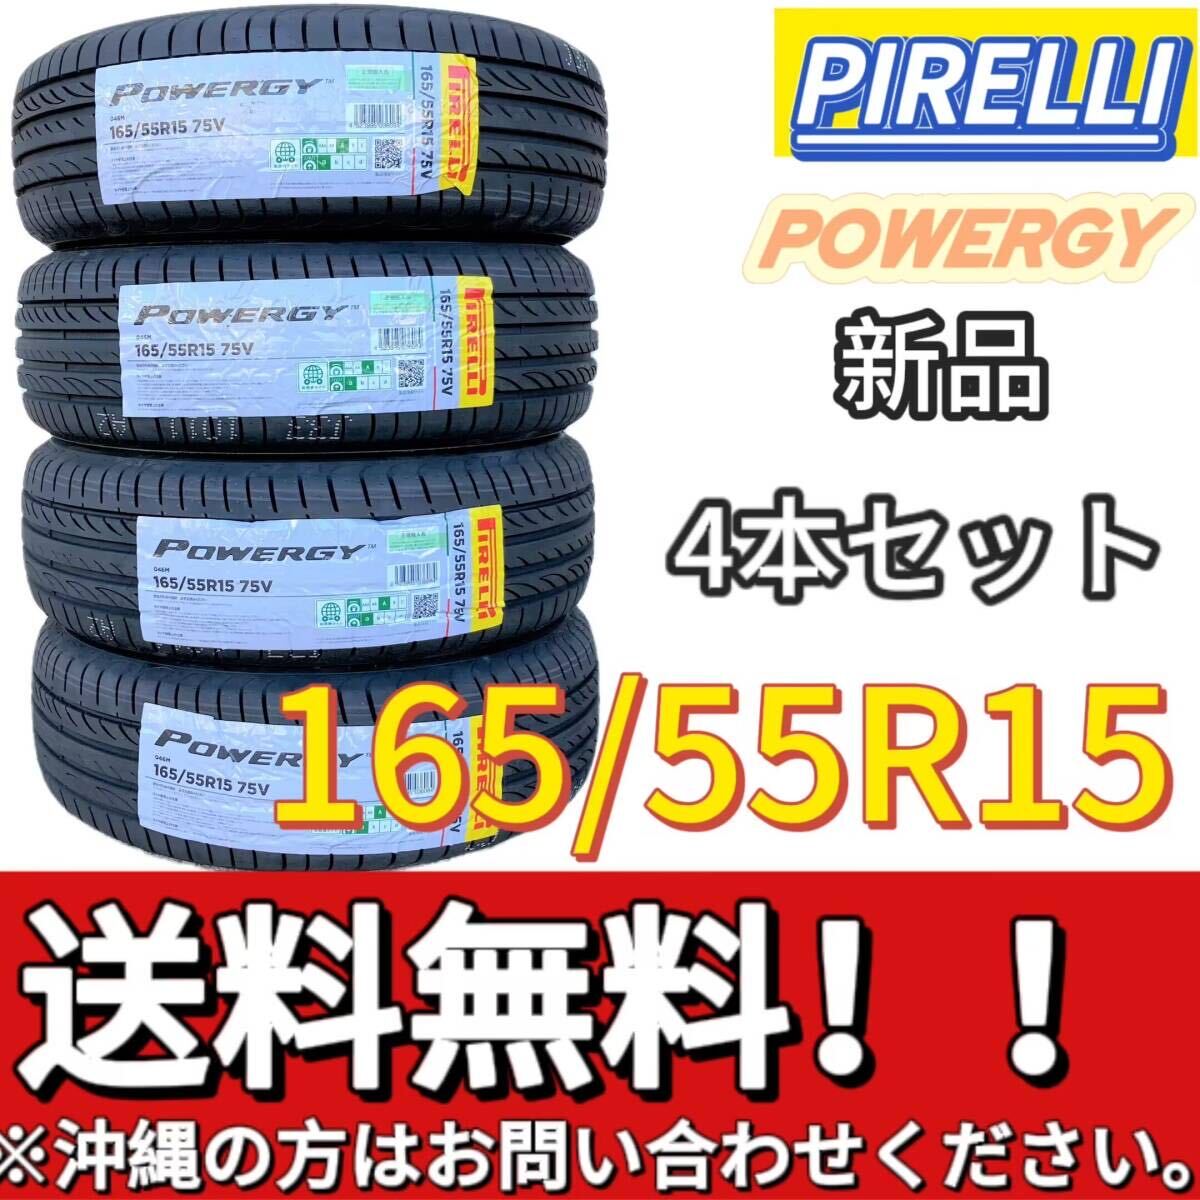  storage sack attaching free shipping new goods 4ps.@(001528) 2024 year made PIRELLI POWERGY 165/55R15 75V summer tire 